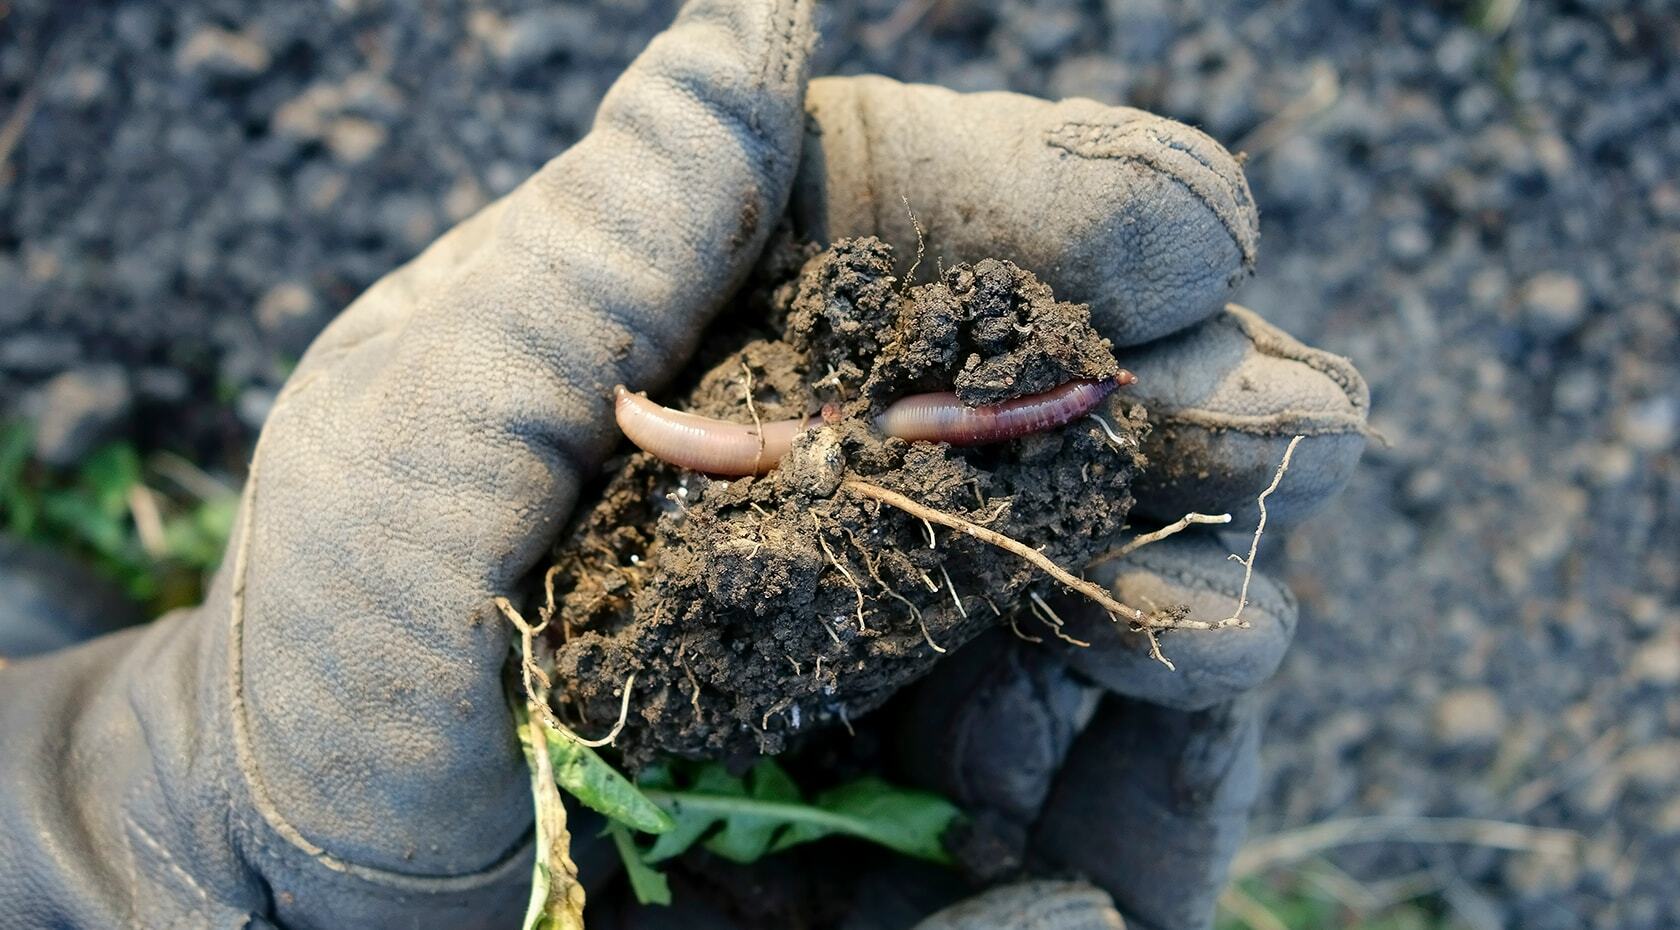 A person holding soil from garden or field with worm in it